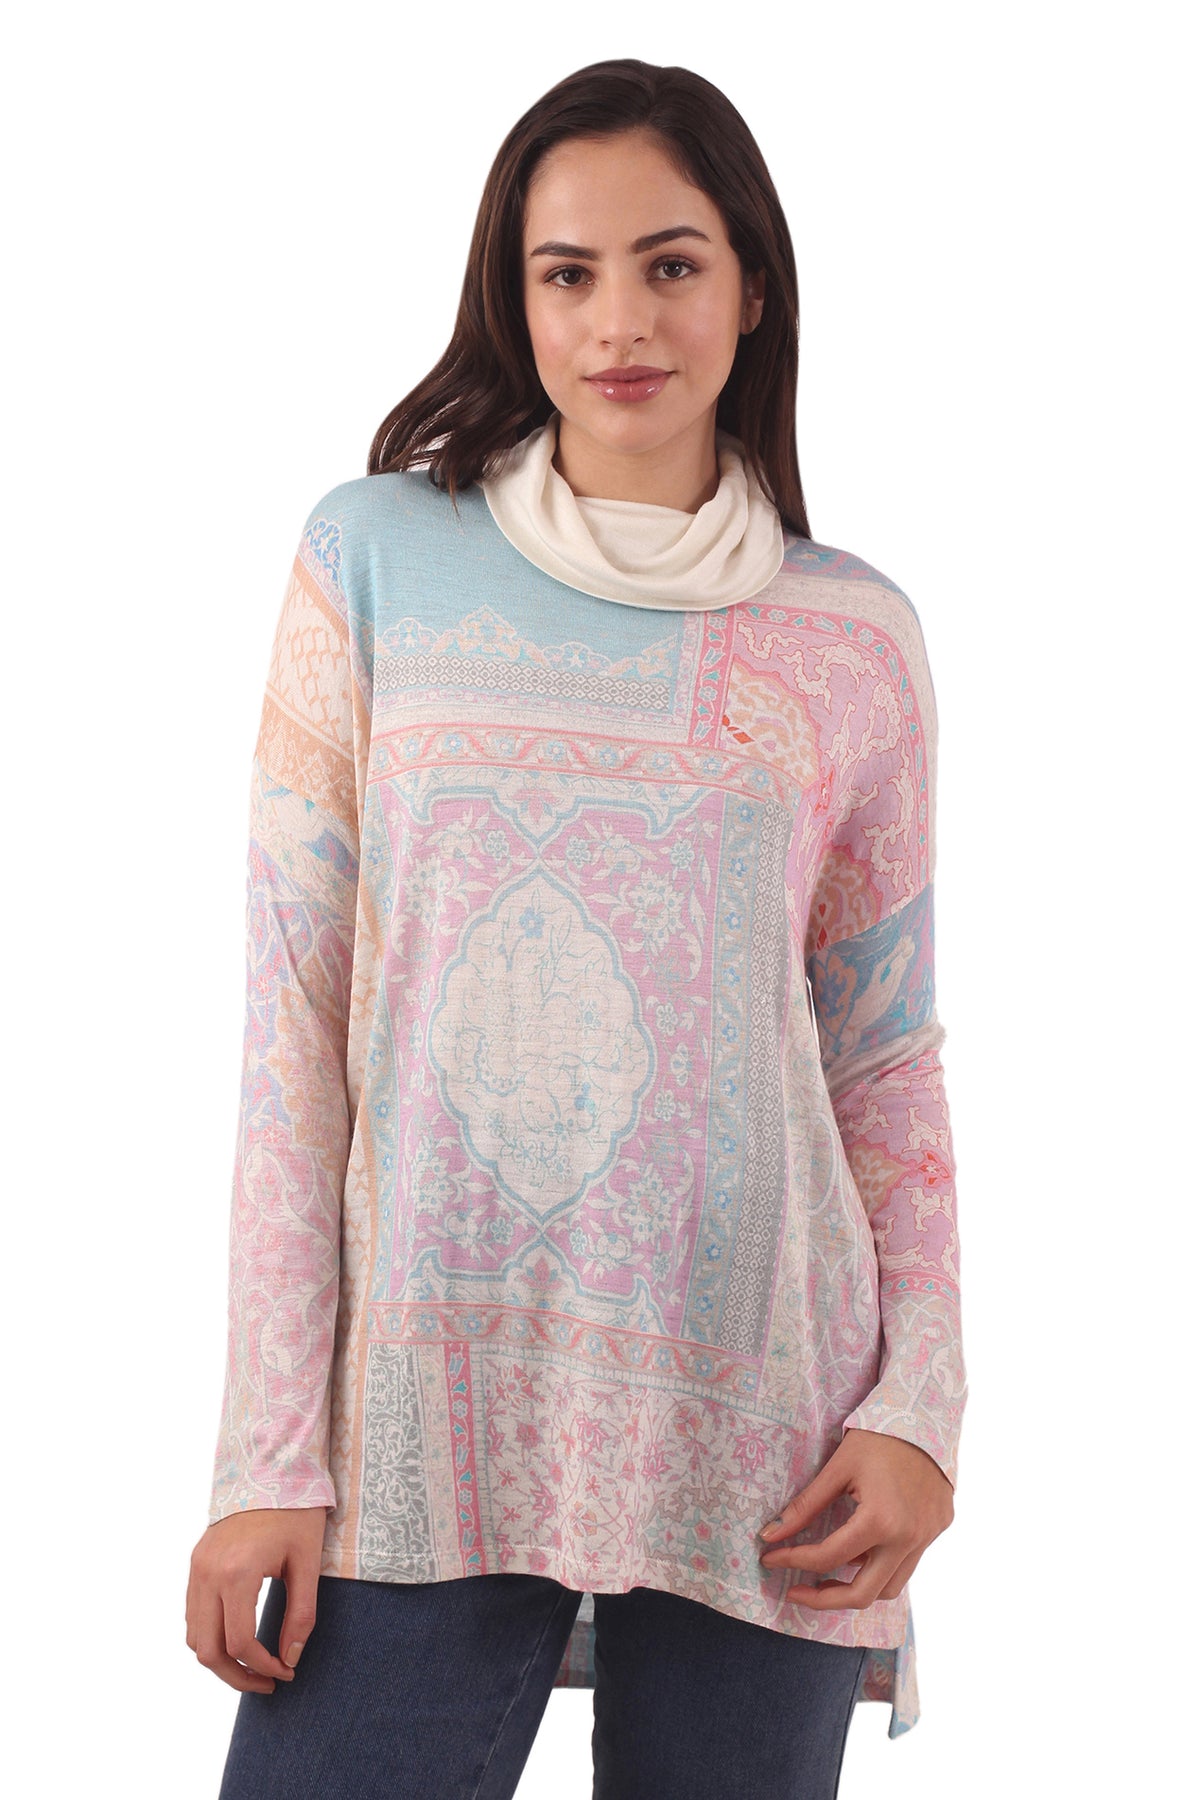 Muted Paisley Top - Mock neck